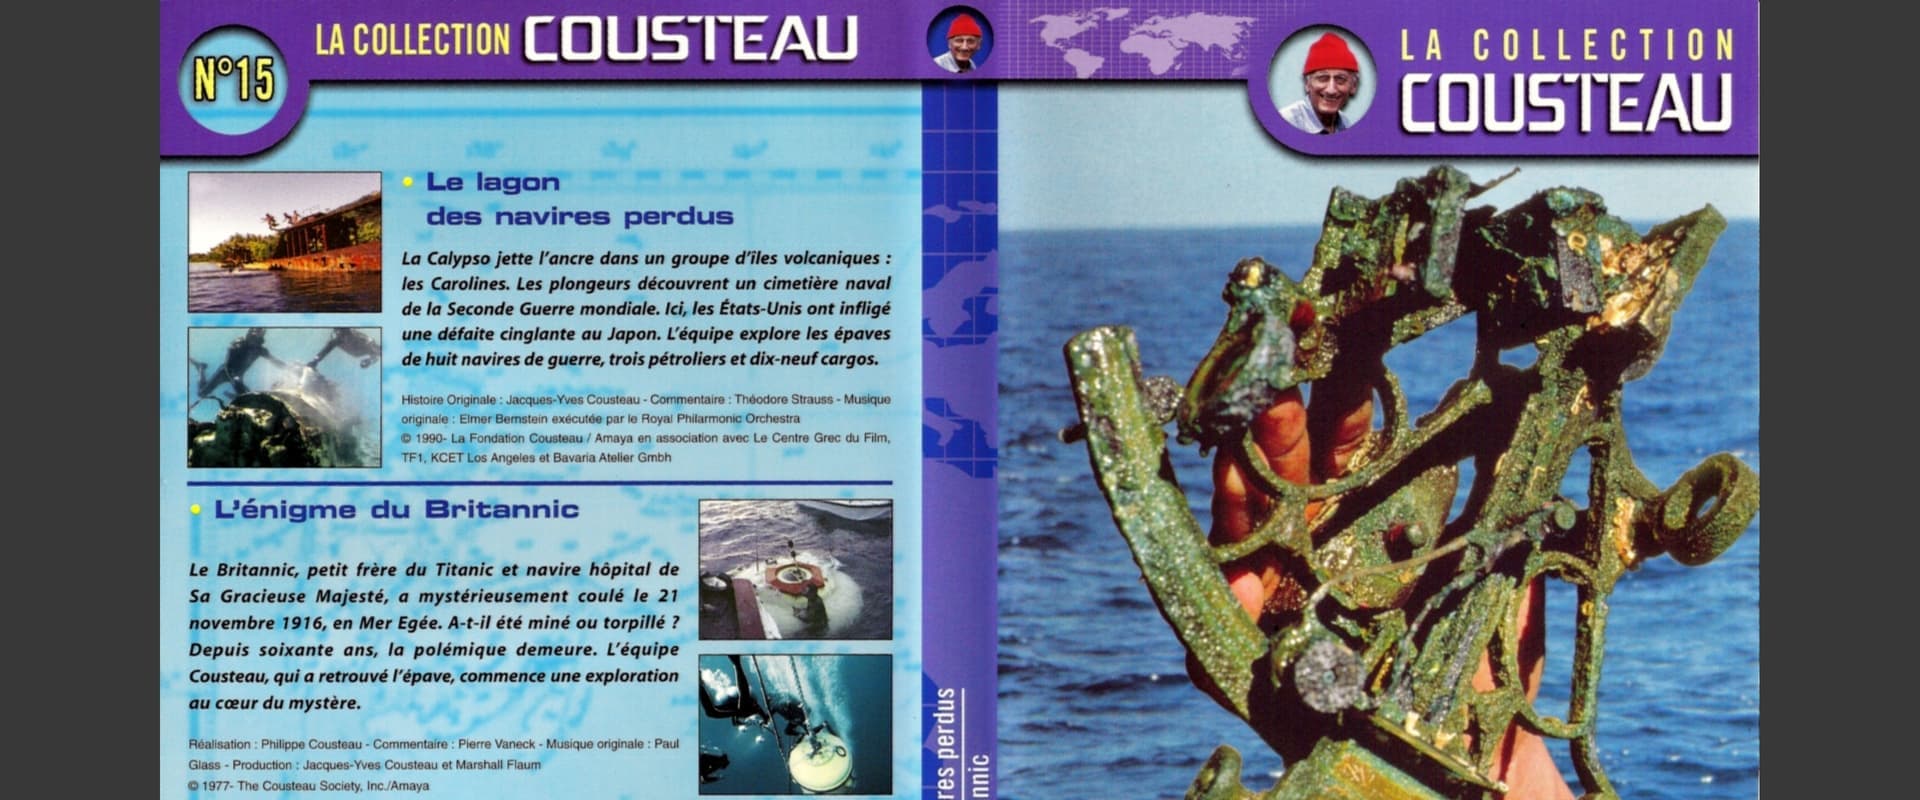 The Cousteau Collection N°15-1 | The Lagoon of Lost Ships